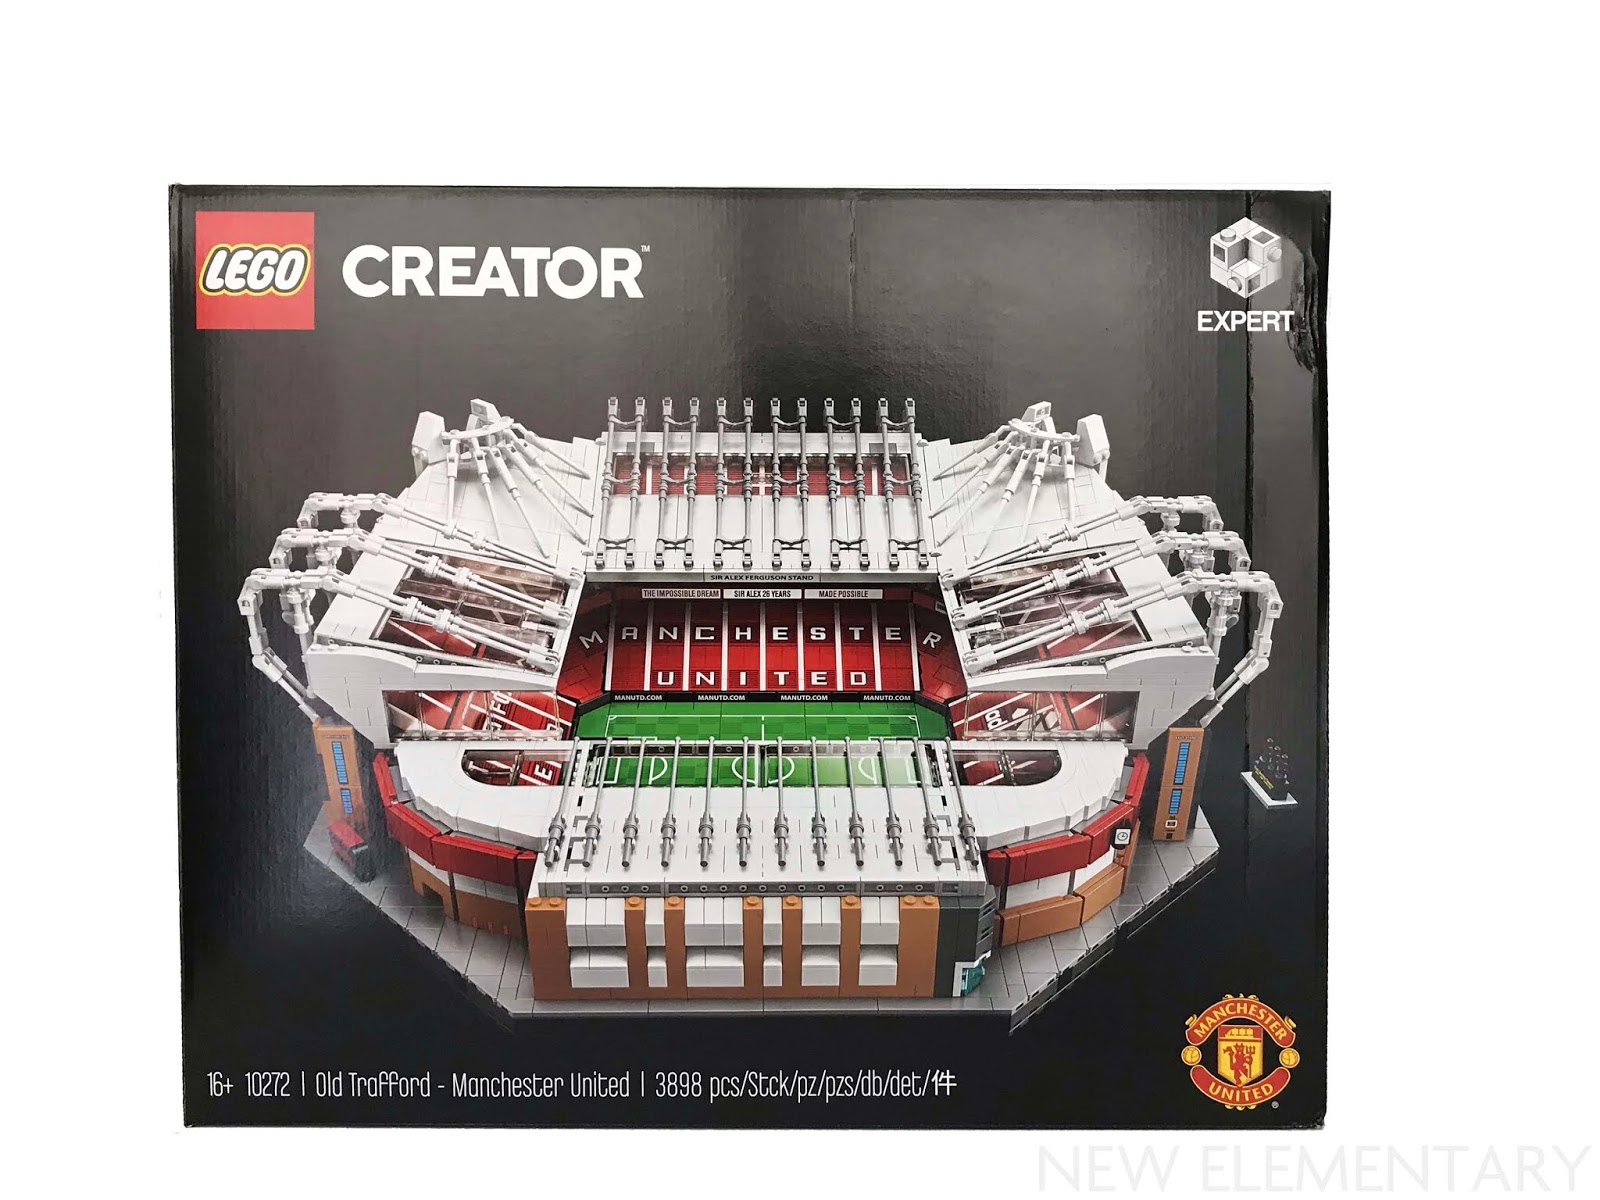 LEGO® Creator Expert review: 10272 Old Trafford - Manchester United | Elementary: LEGO® parts, sets and techniques